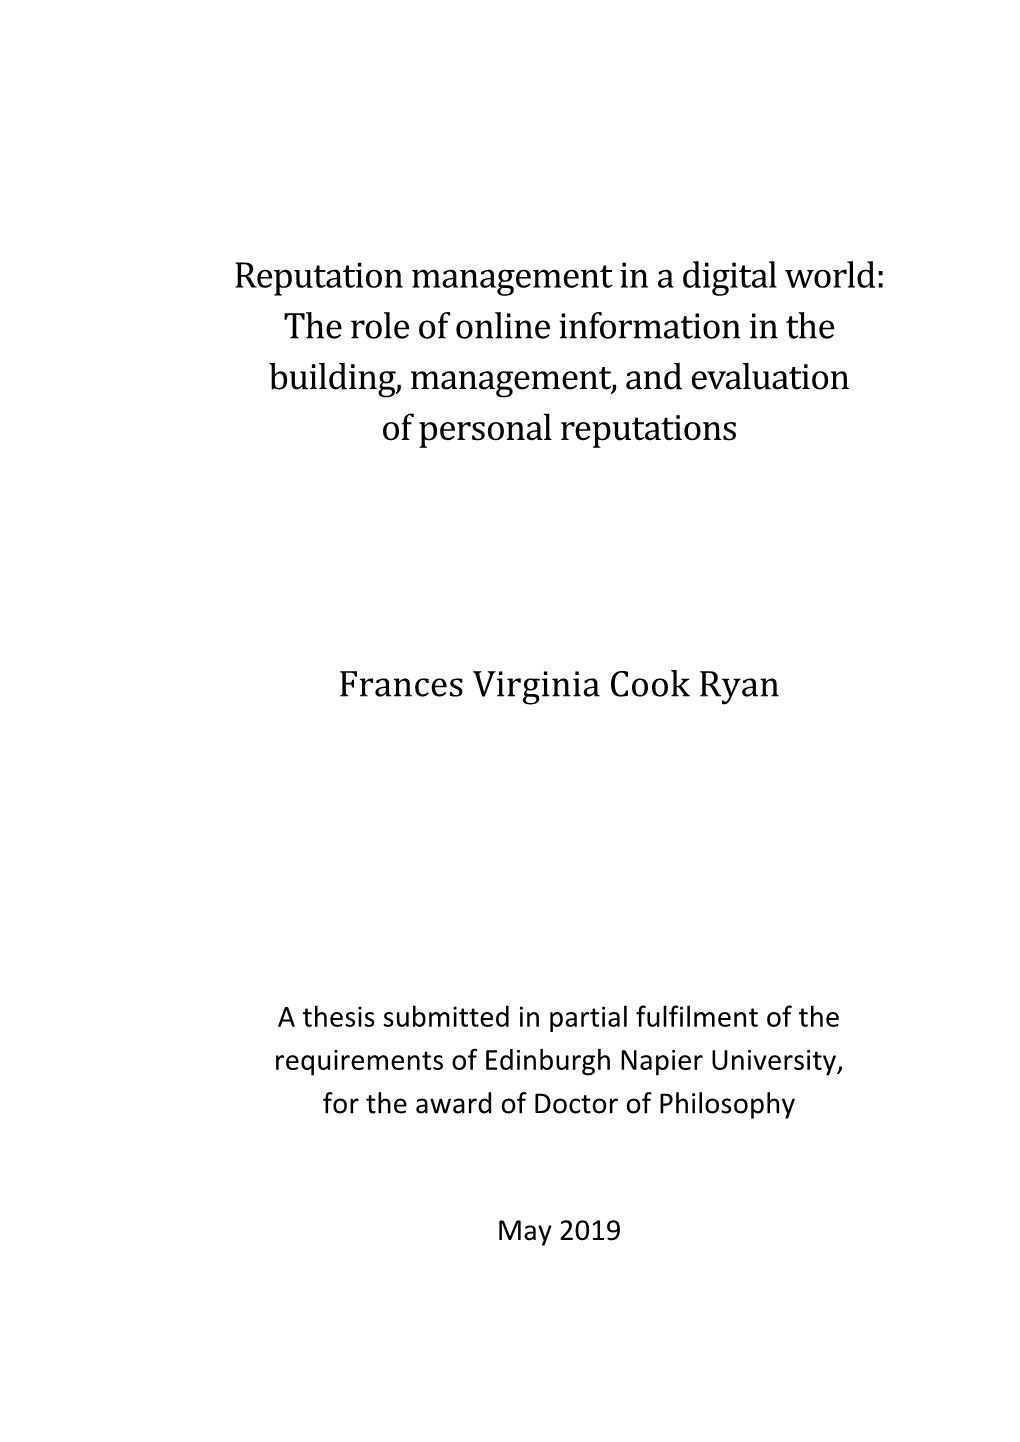 Reputation Management in a Digital World: the Role of Online Information in the Building, Management, and Evaluation of Personal Reputations